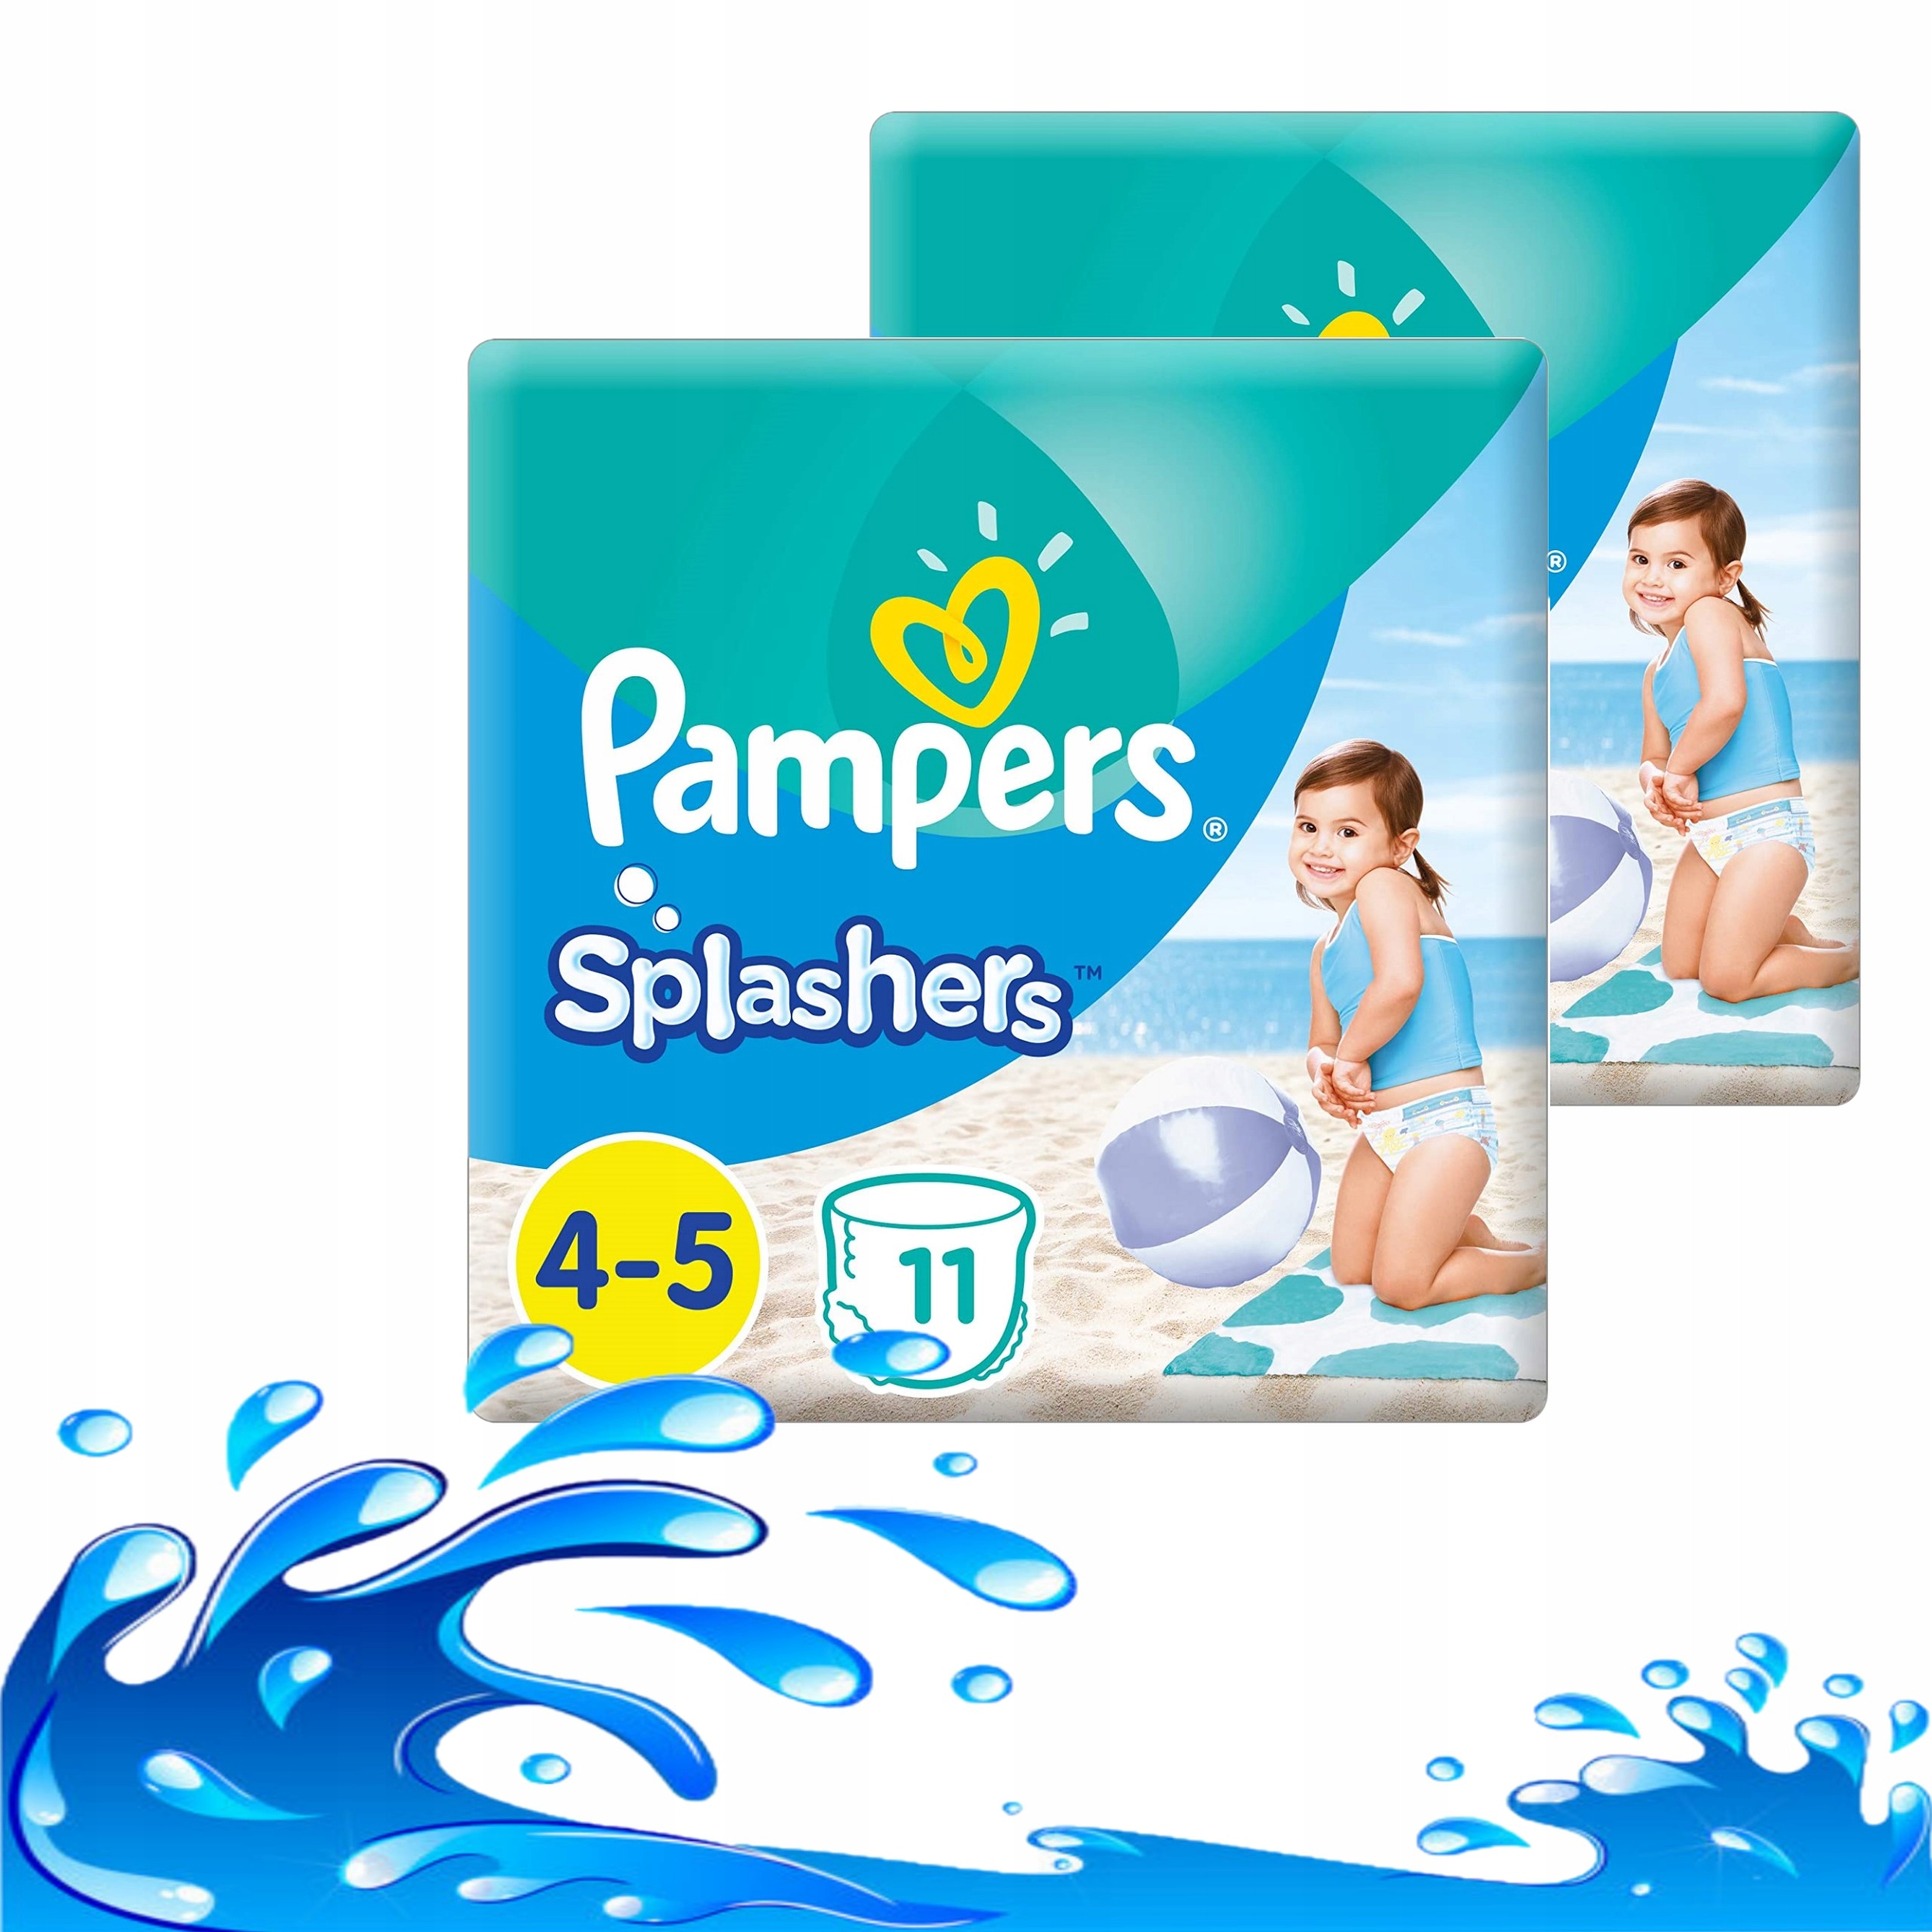 pampers fitness challenge